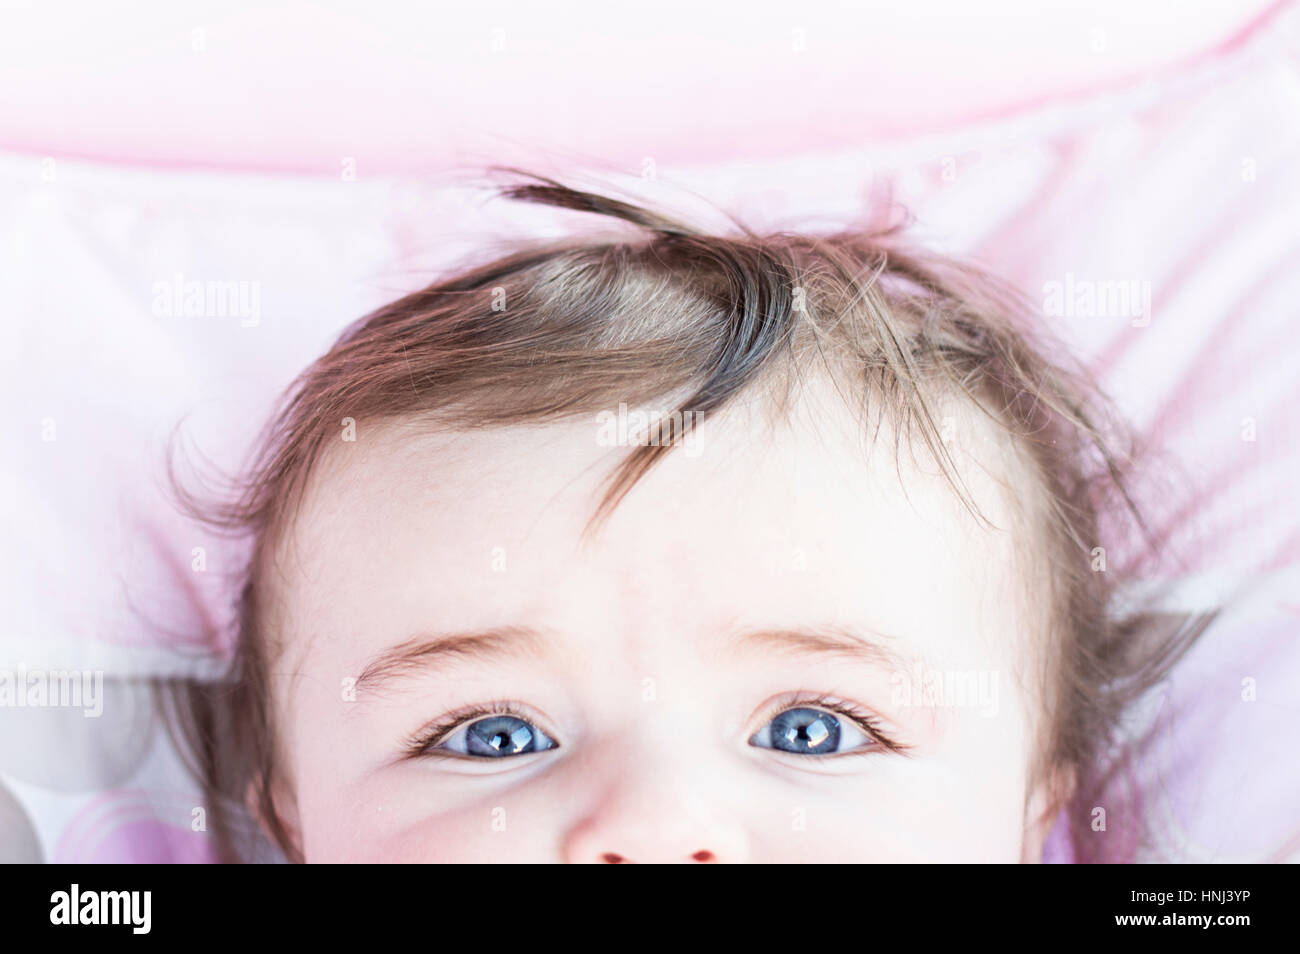 Cropped image of baby girl lying on bed Stock Photo